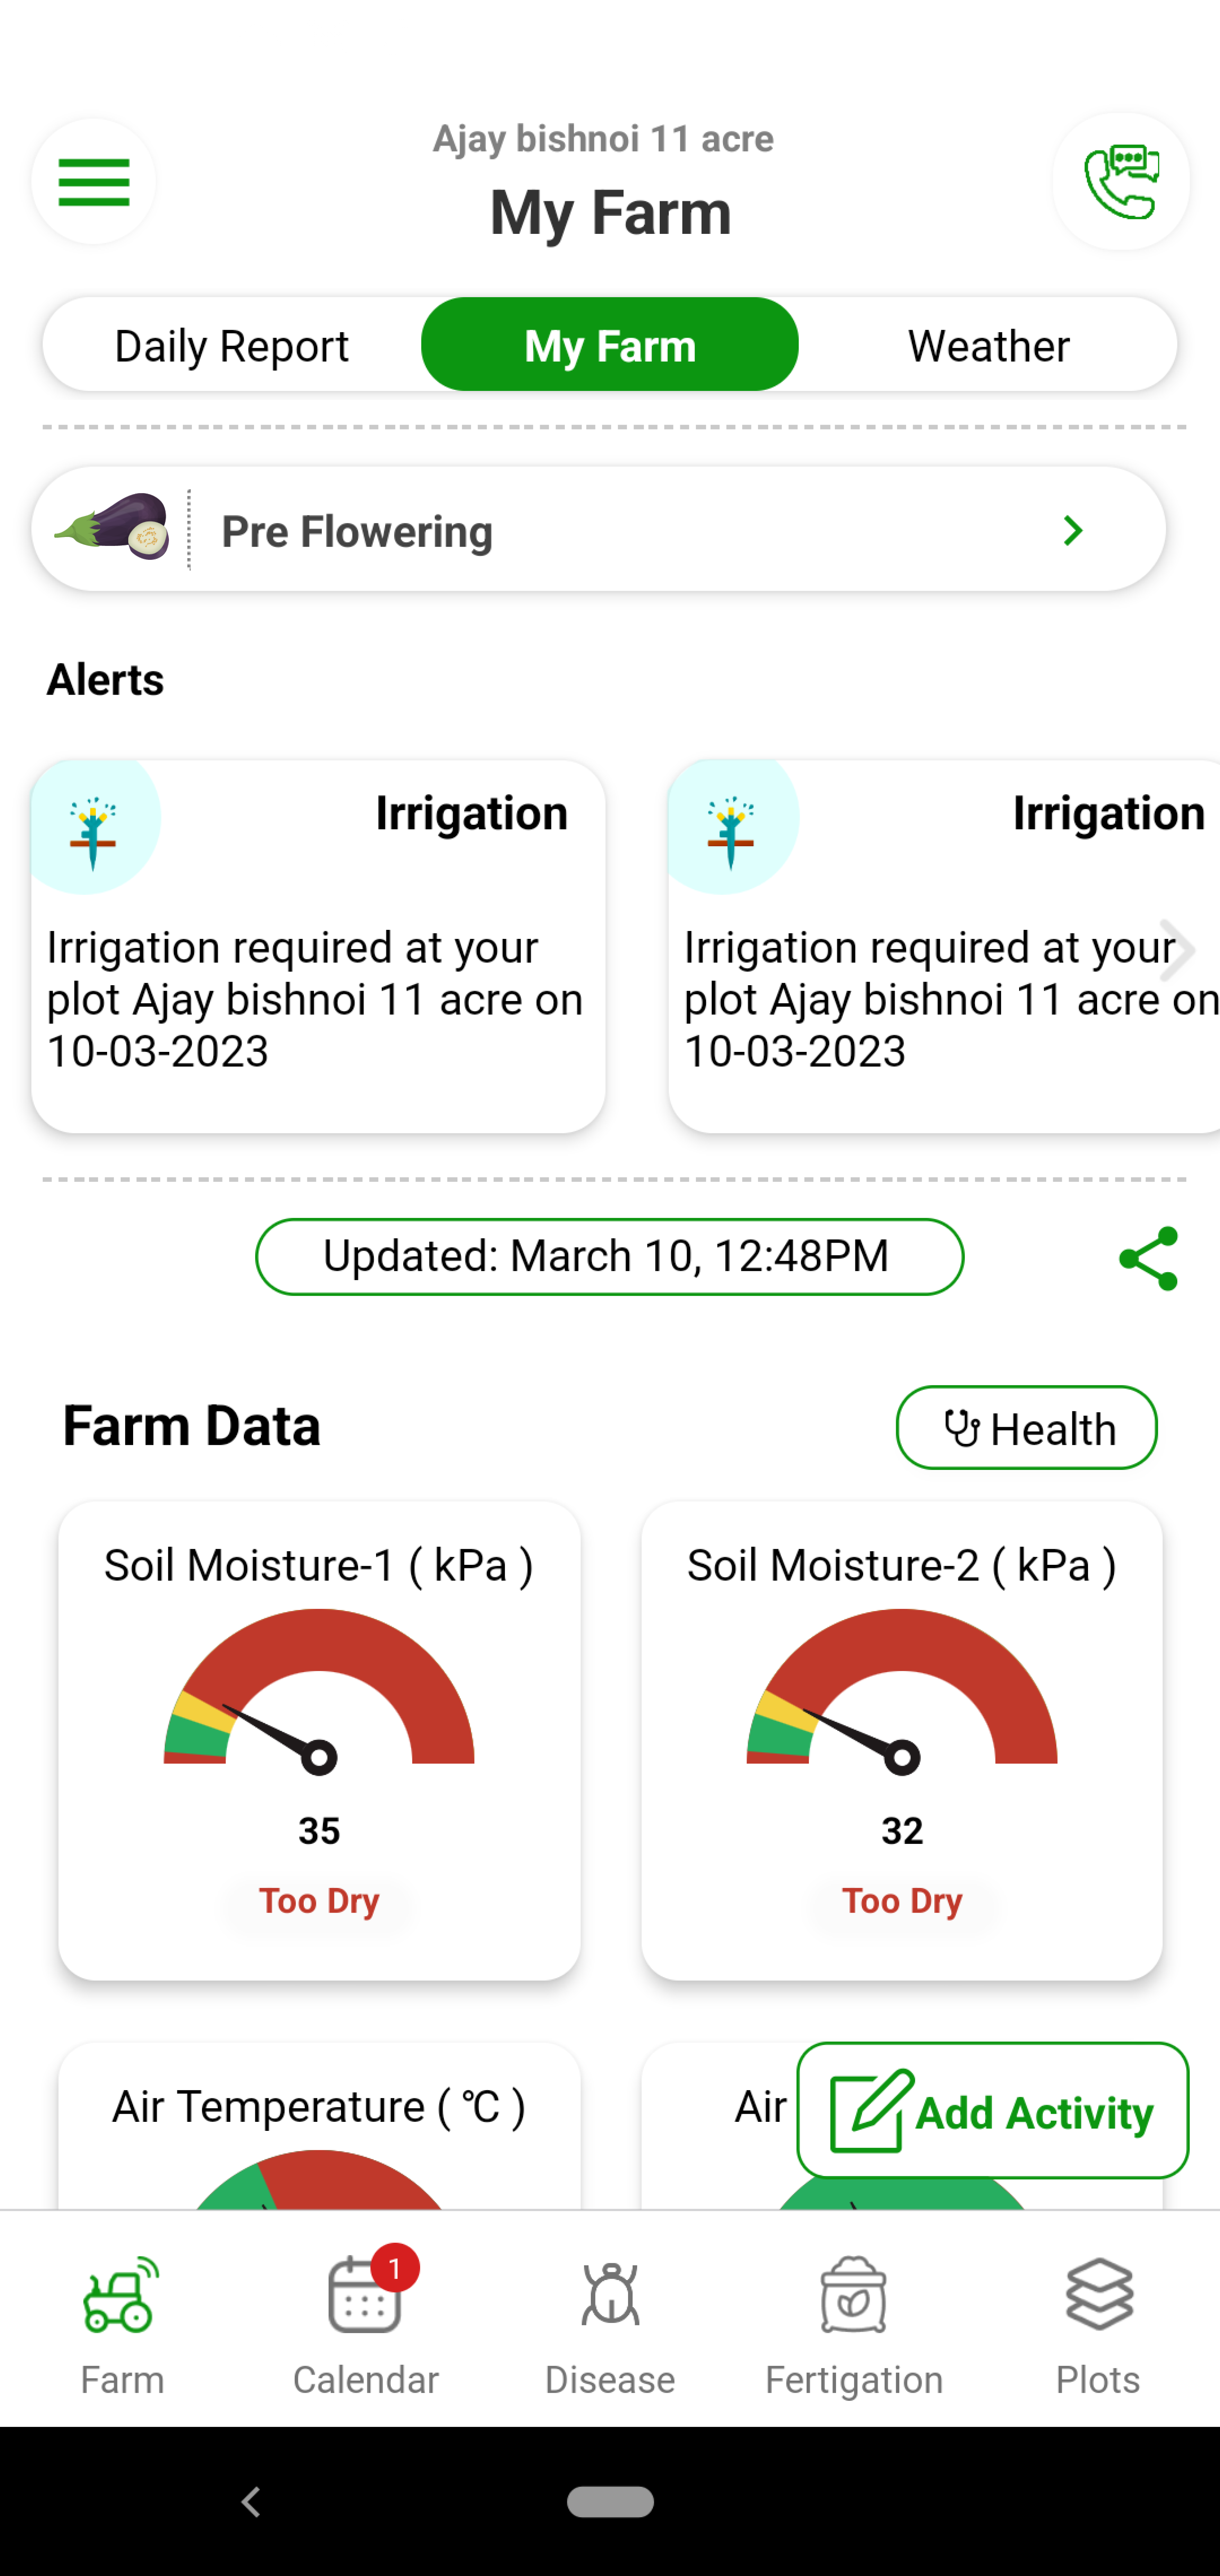 Too much water or too less water can be very harmful for Brinjal. Over irrigation leads to wilting in the plants. Brinjal’s water requirements vary based on soil type and stage. With Fyllo’s device containing soil moisture and soil temperature sensor and intelligent software, you get alerts on how much water to provide to the crop. You can also see and visualize evapotranspiration (Etc) values of the crop. You can perfectly manage the water requirements to get the perfect size, color.